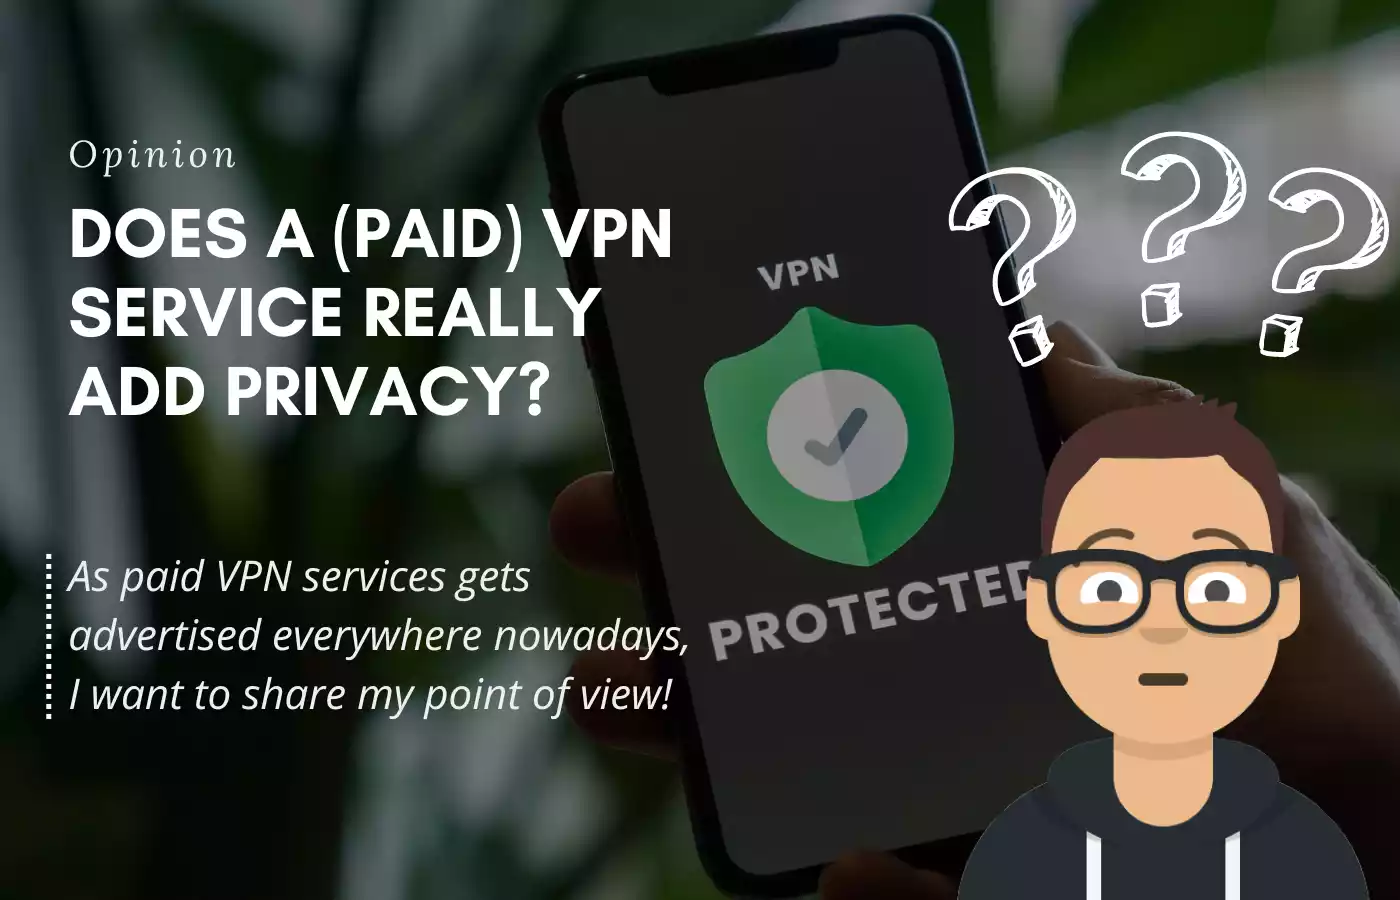 Opinion: Does a (paid) VPN Service really protect your Privacy?